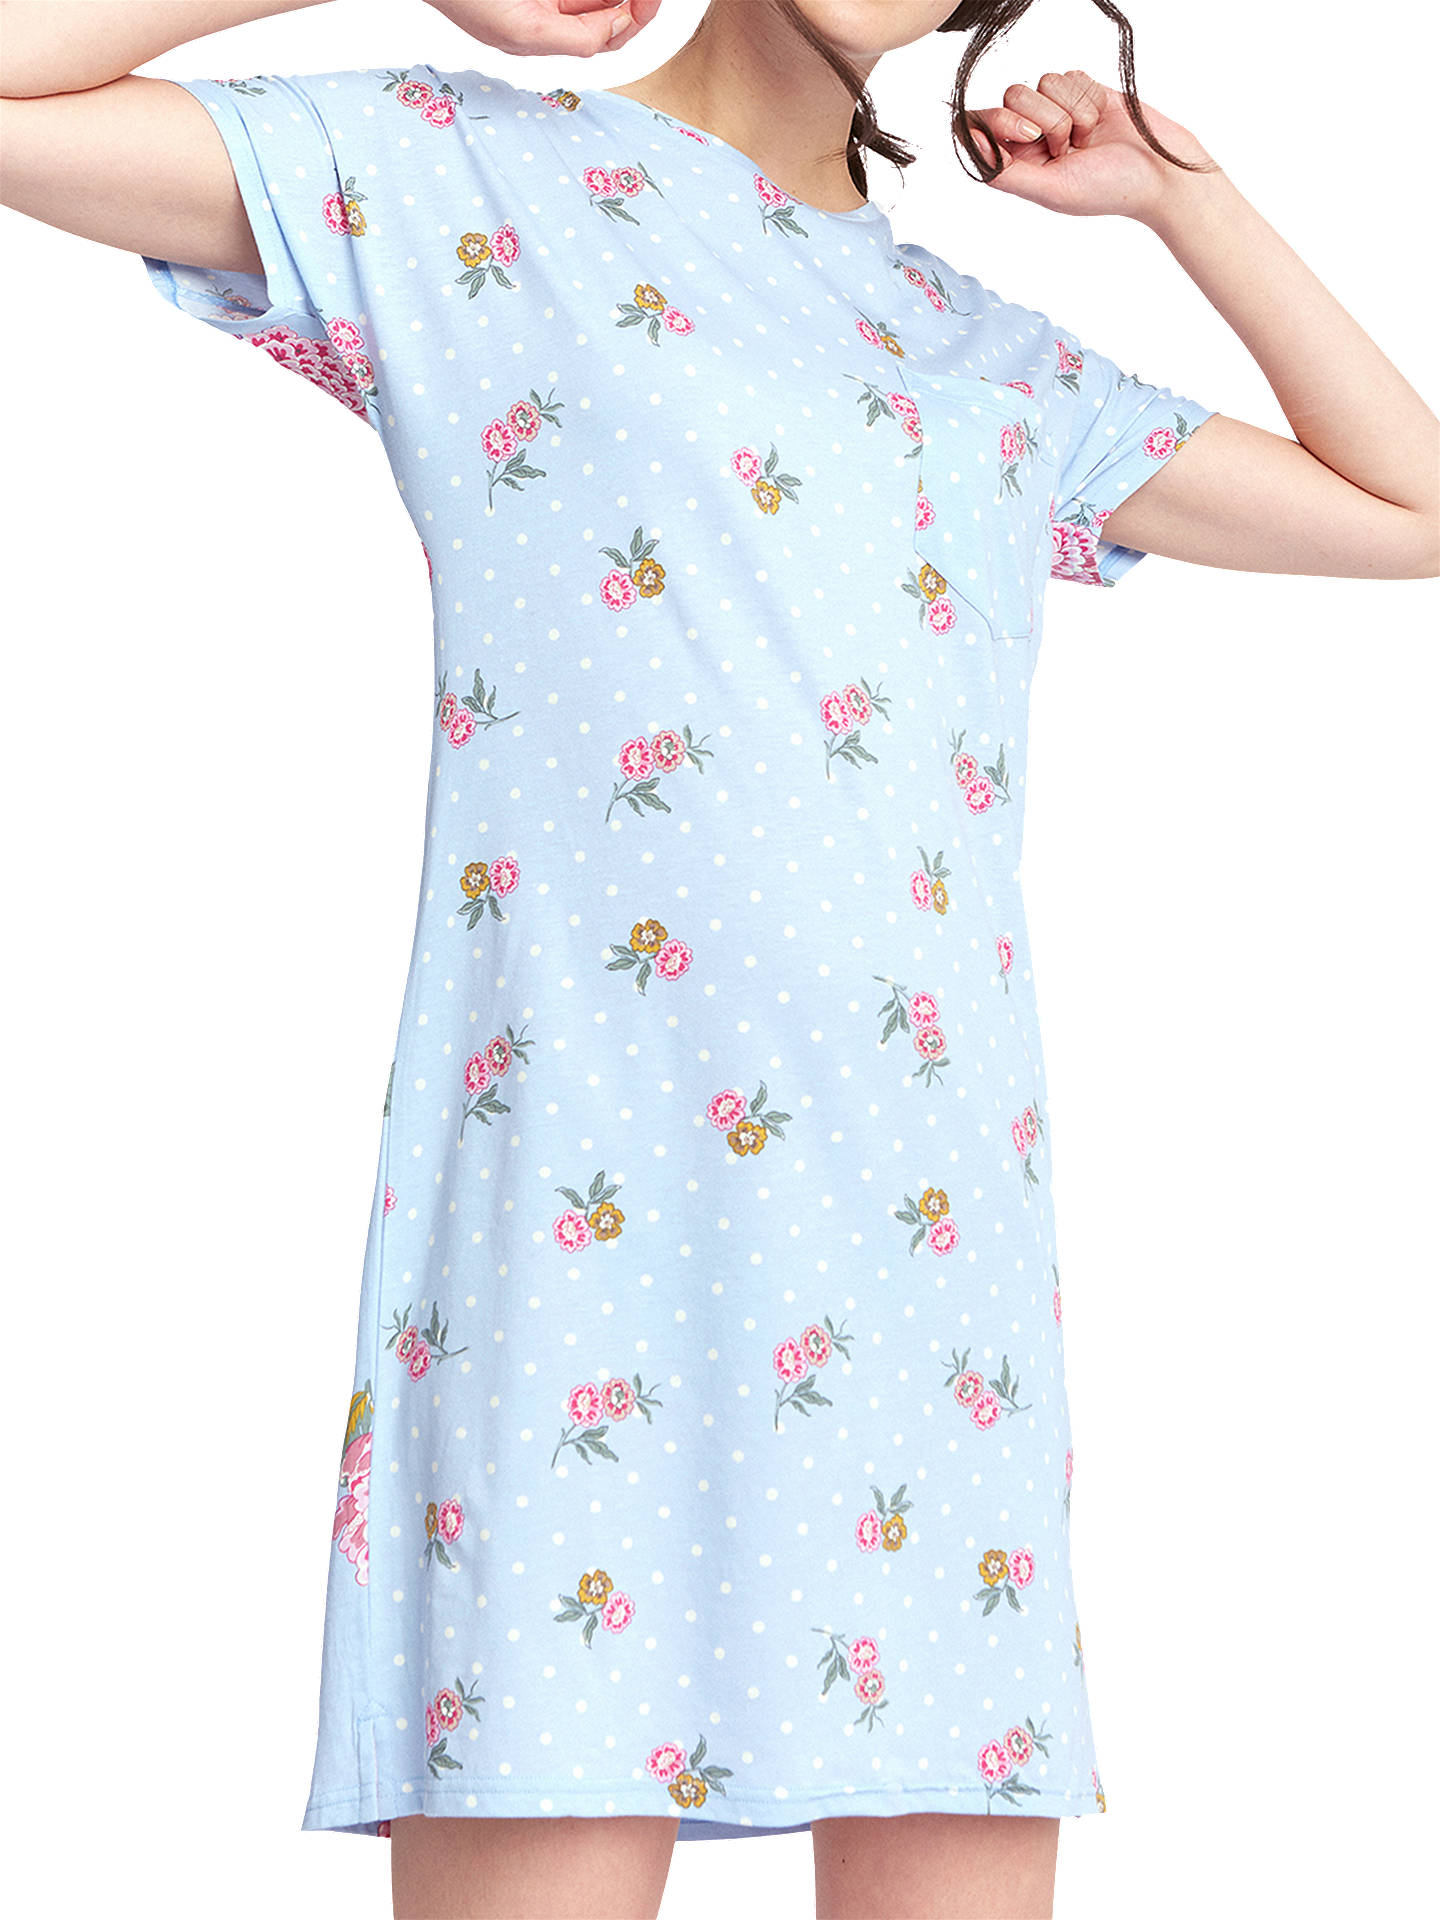 Joules Floral Spot Print Nightdress, Blue at John Lewis & Partners